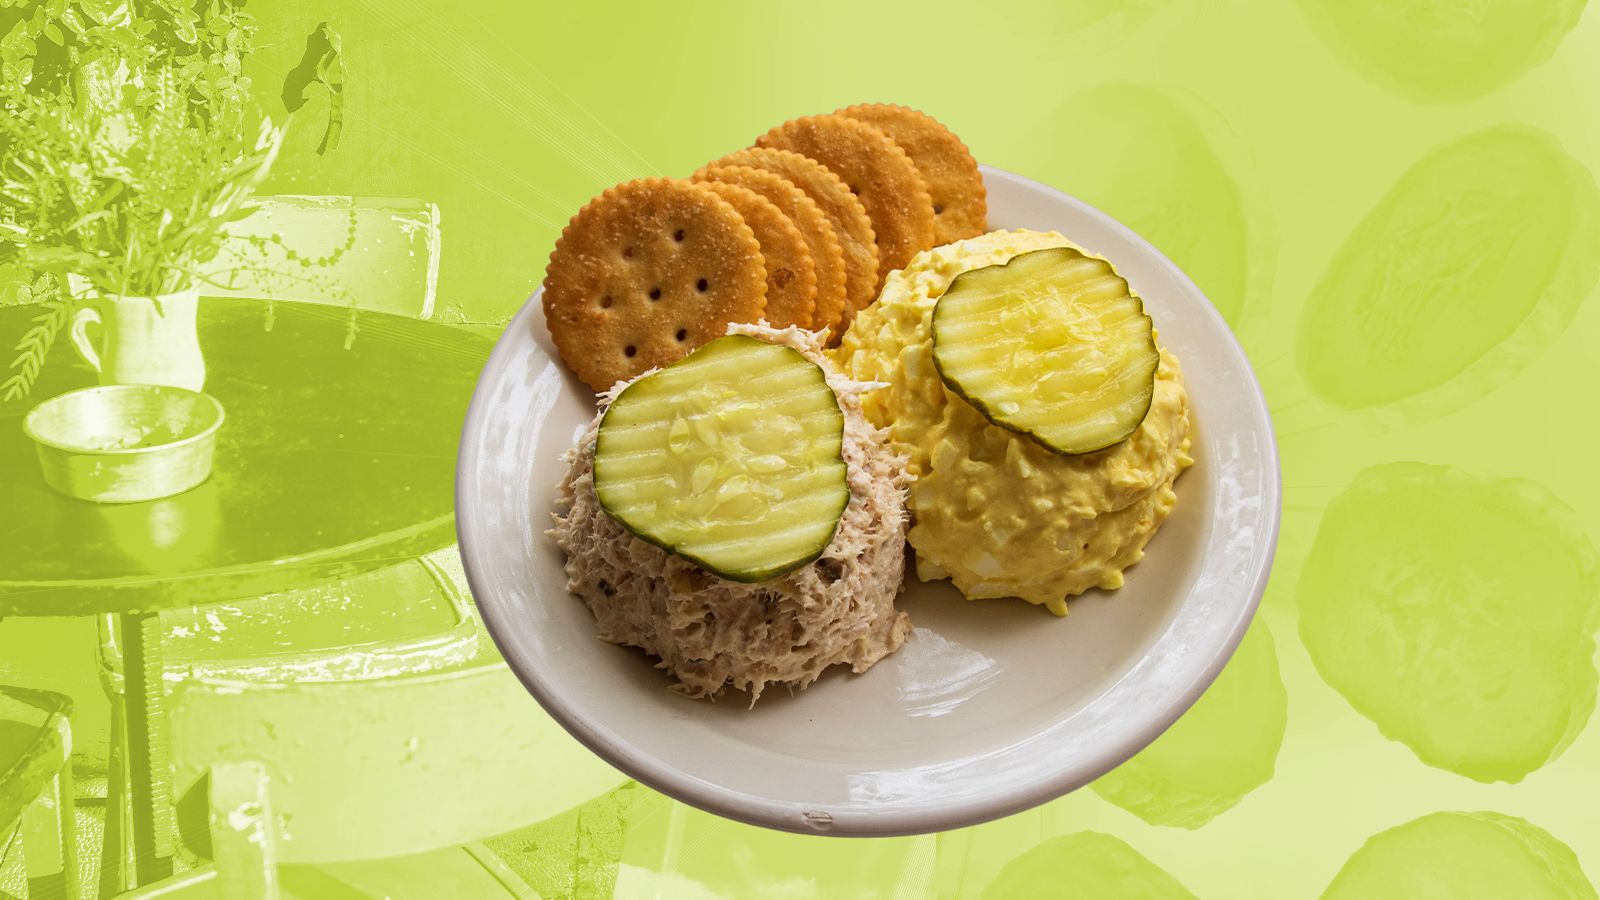 Diner plate containing one scoop of tuna salad and one scoop of chicken salad, each topped with a pickle slice. Ritz-style crackers sit on the plate alongside.